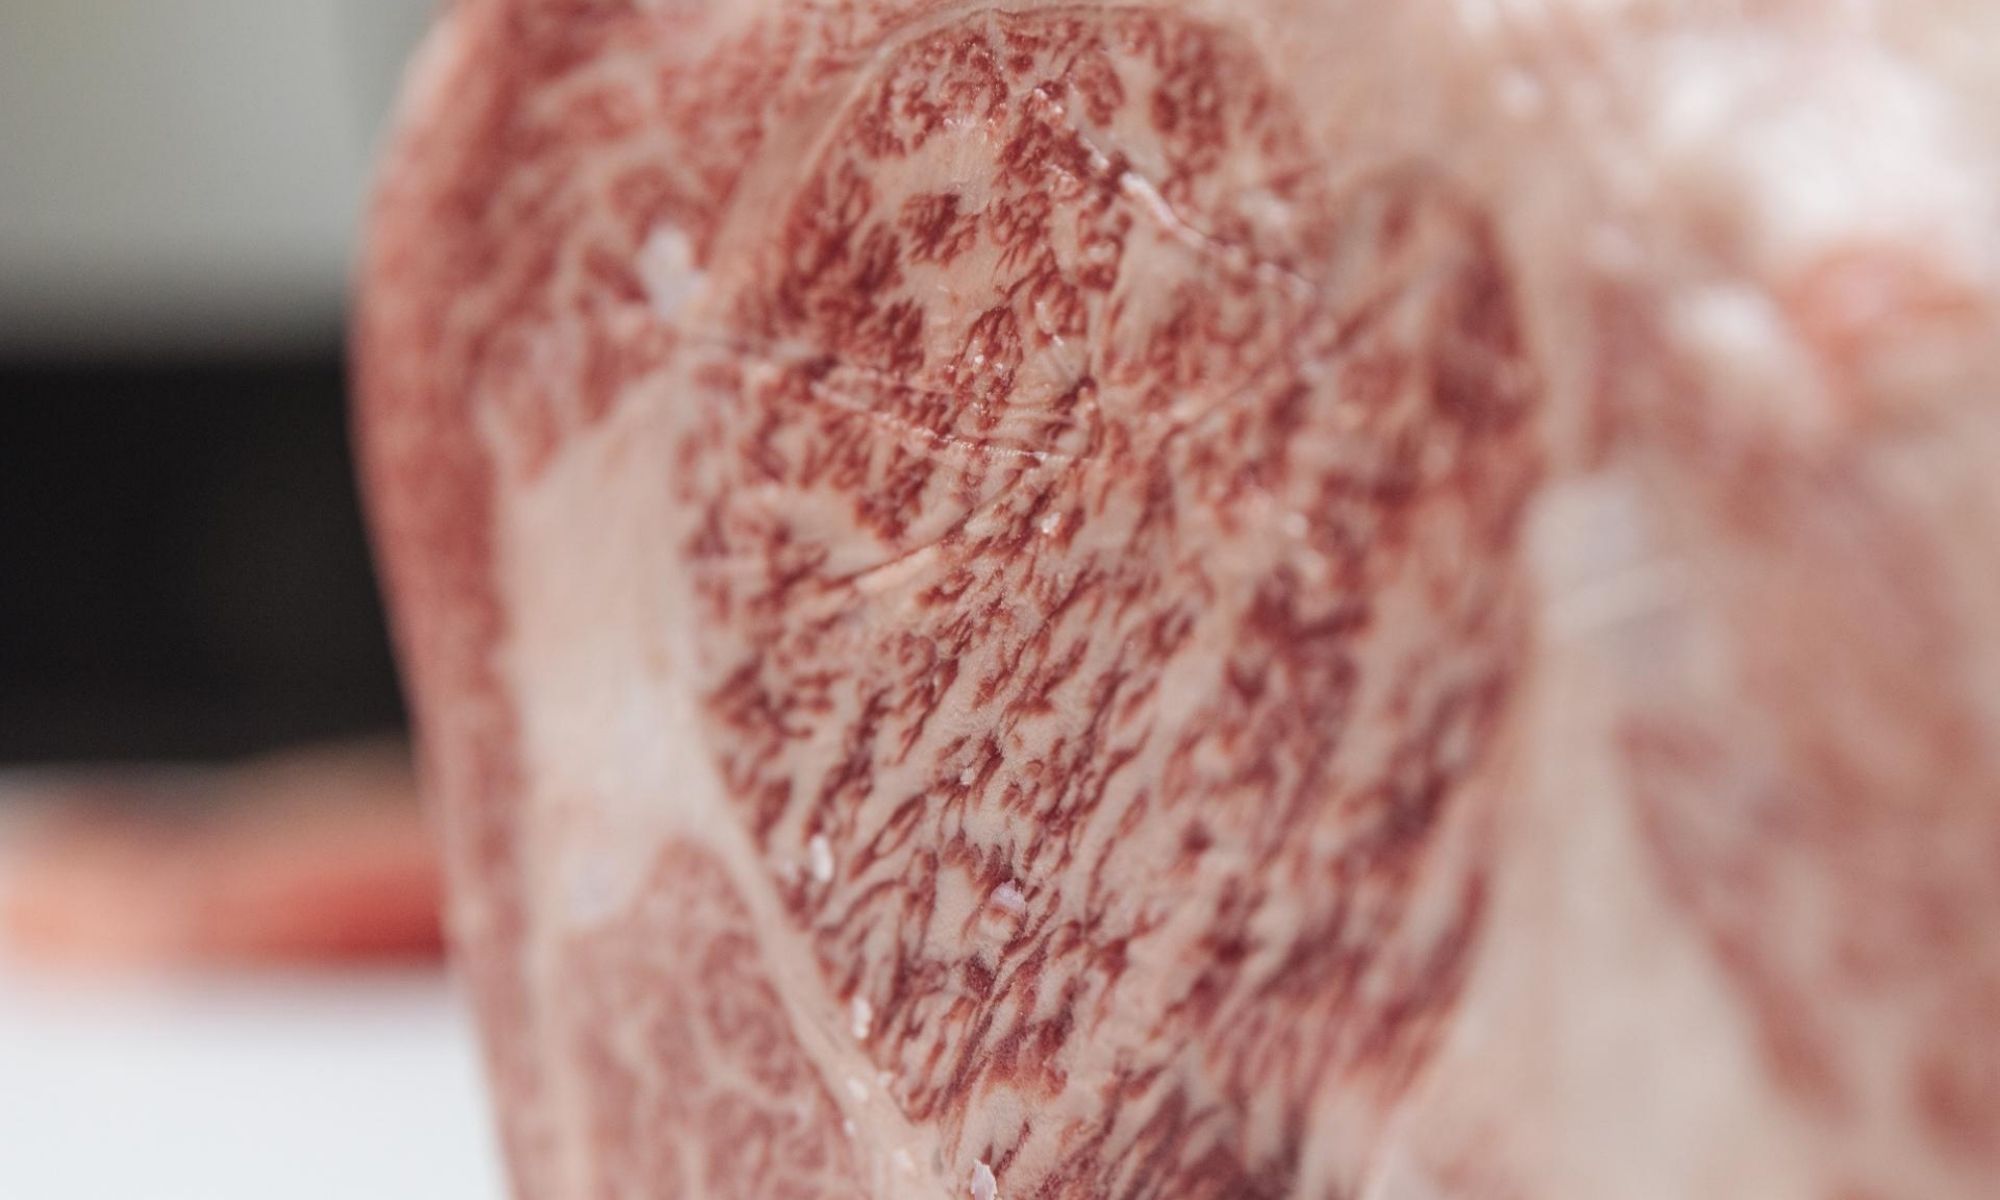 Wagyu beef is one of the most prestigious types of beef in the world